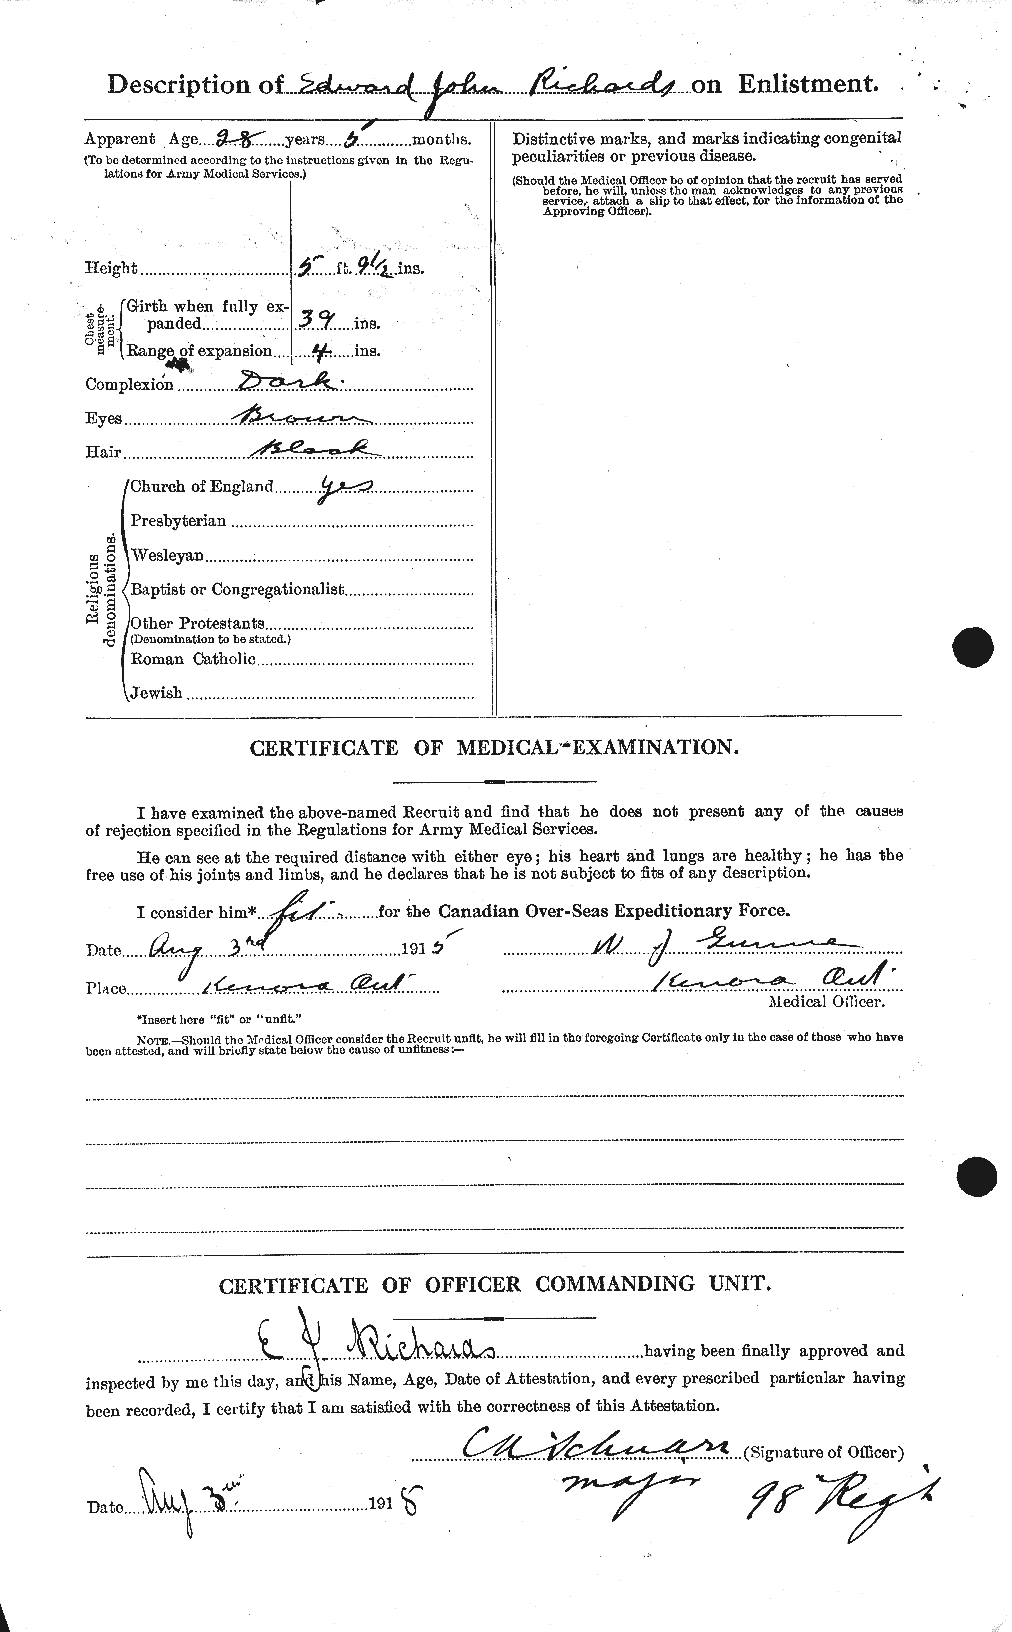 Personnel Records of the First World War - CEF 601724b